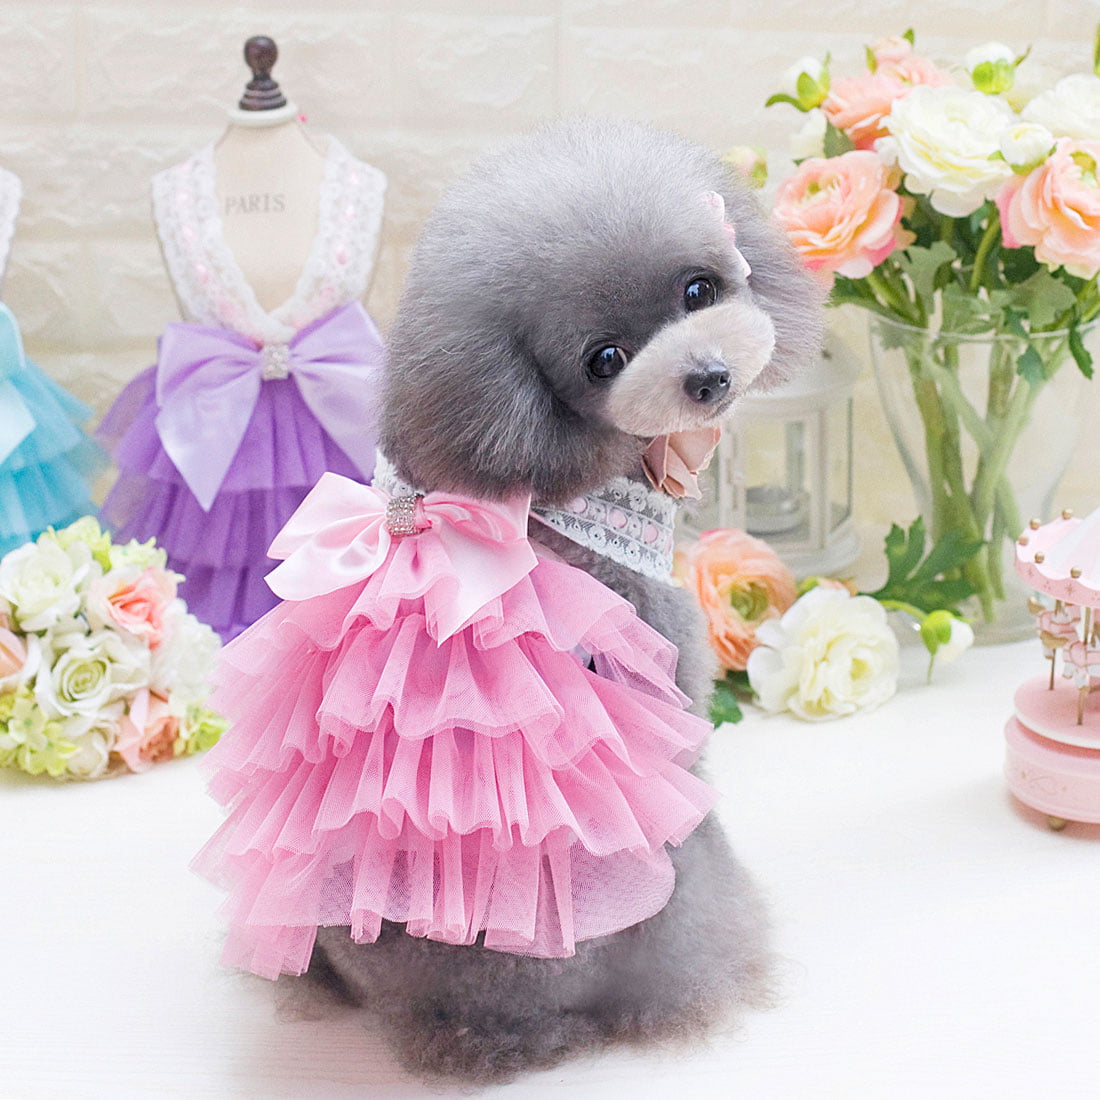 Norbi Pet Dog Dress Dog Outfit Cute Costume Puppy Apparel Spring Summer Plaid Short Princess Skirt with Love Heart